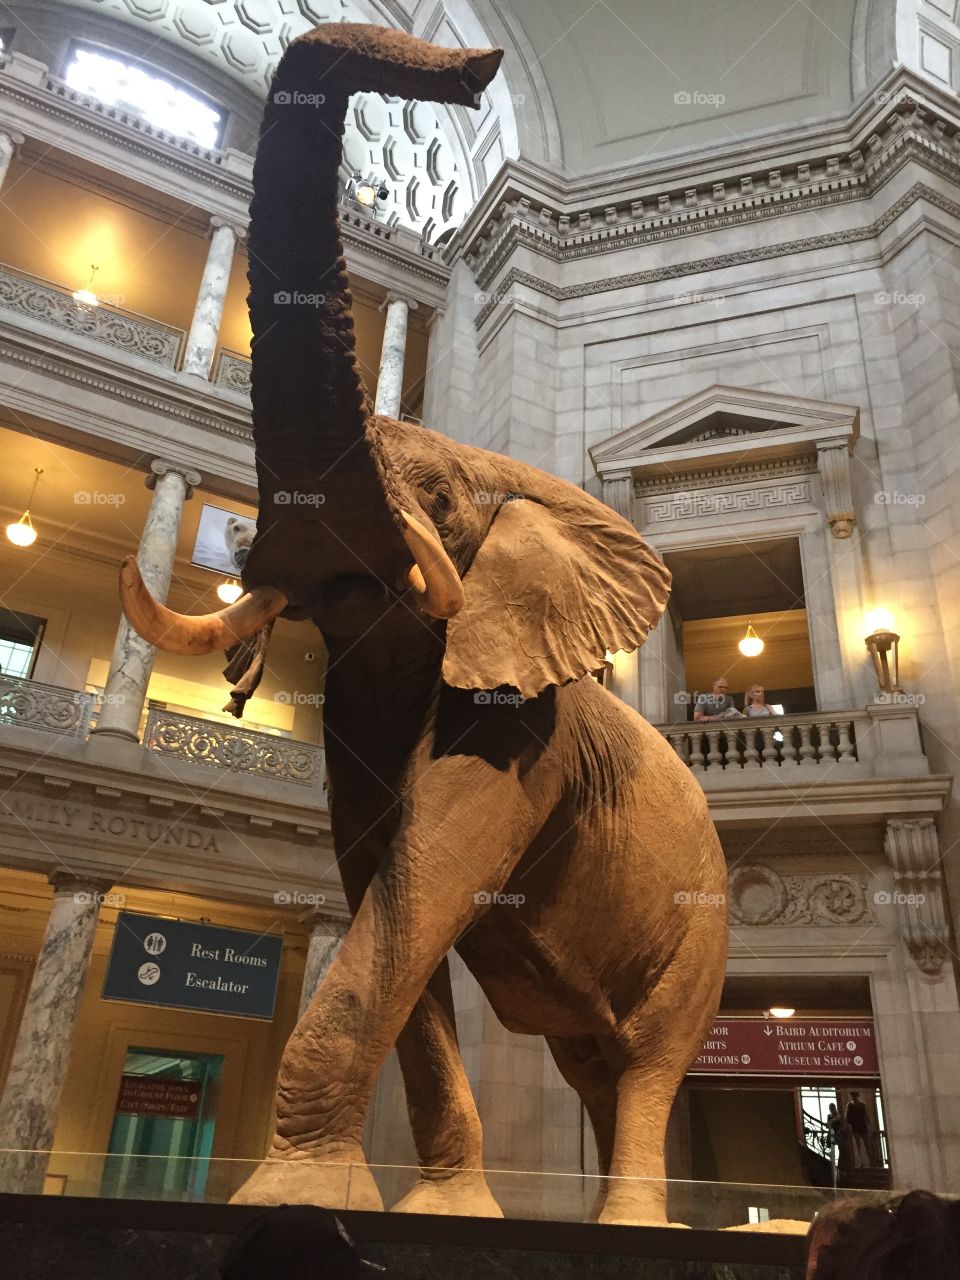 The Museum of Natural History in DC, the elephant from the Night of the Museum movie 